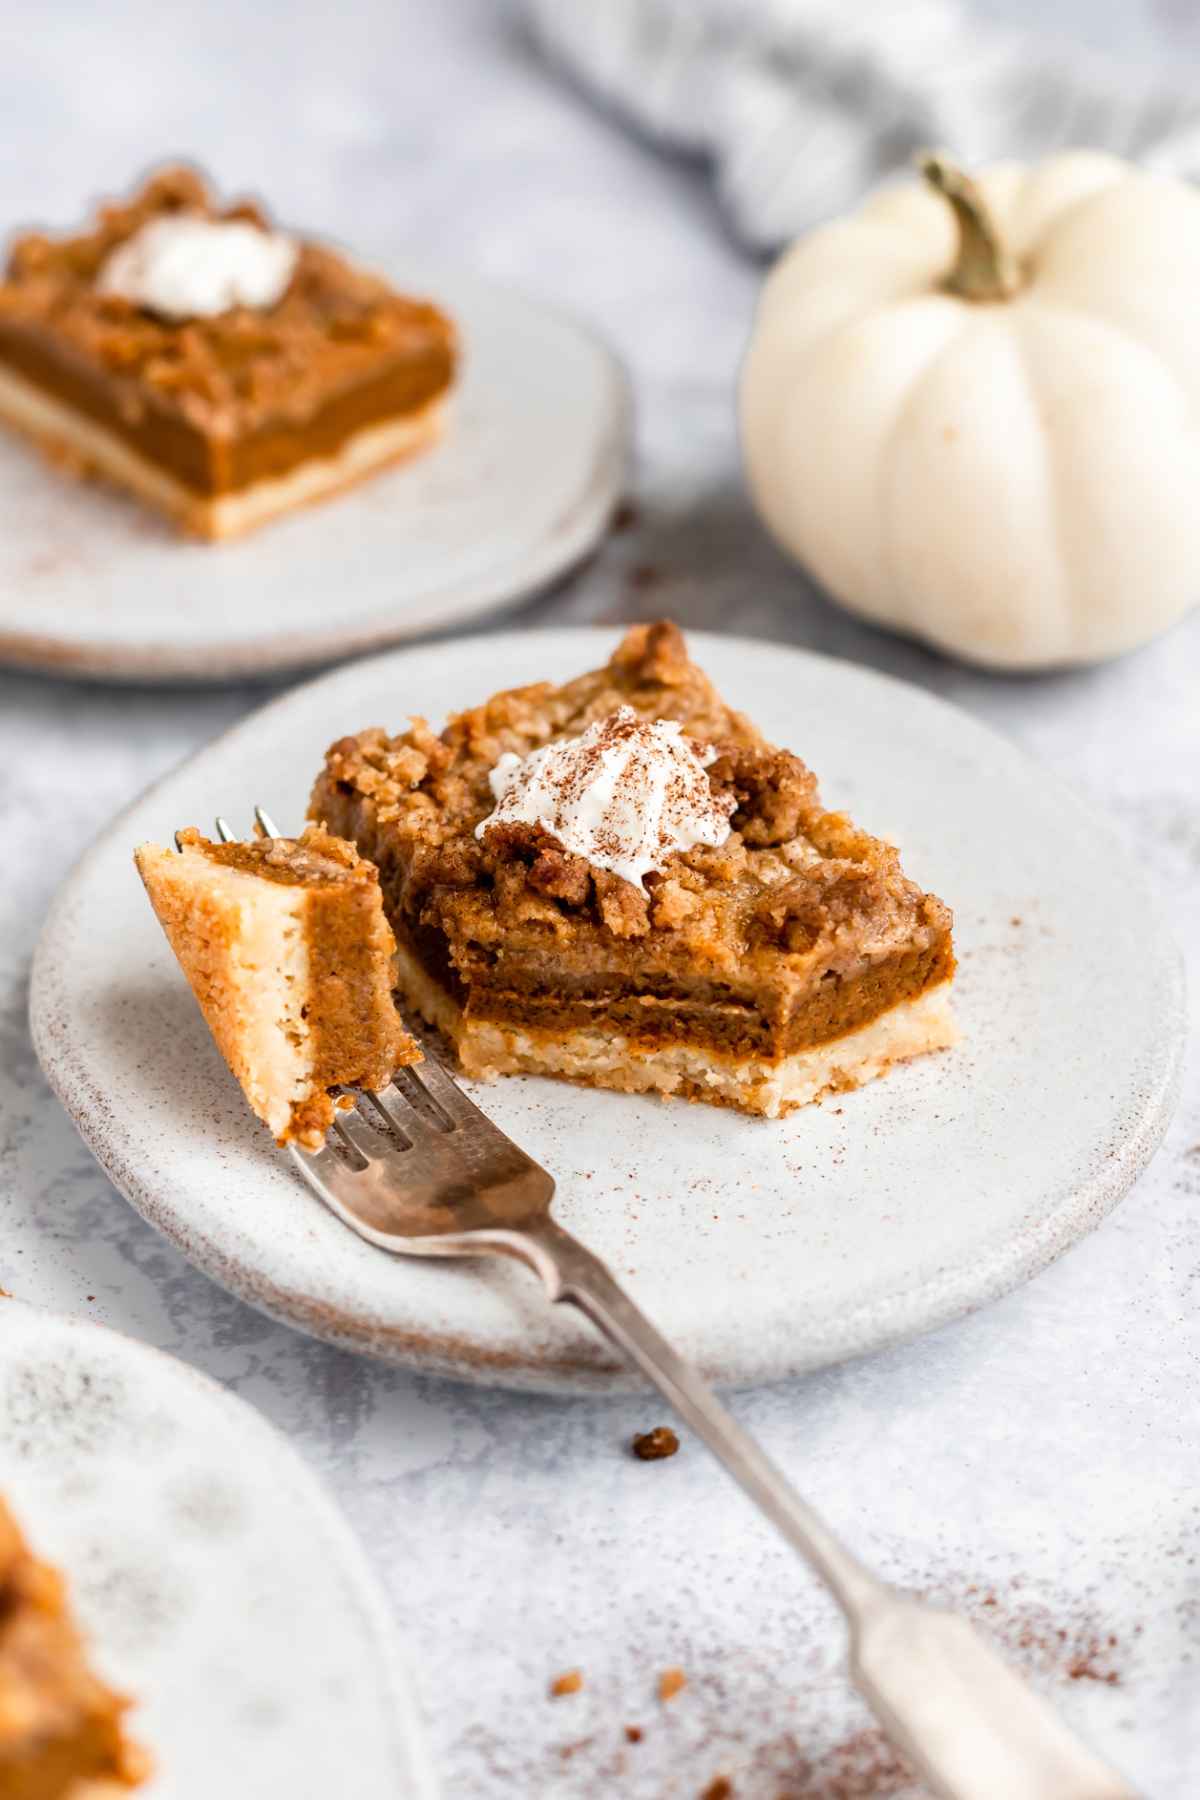 Pumpkin bars served on small white plates with whipped cream.